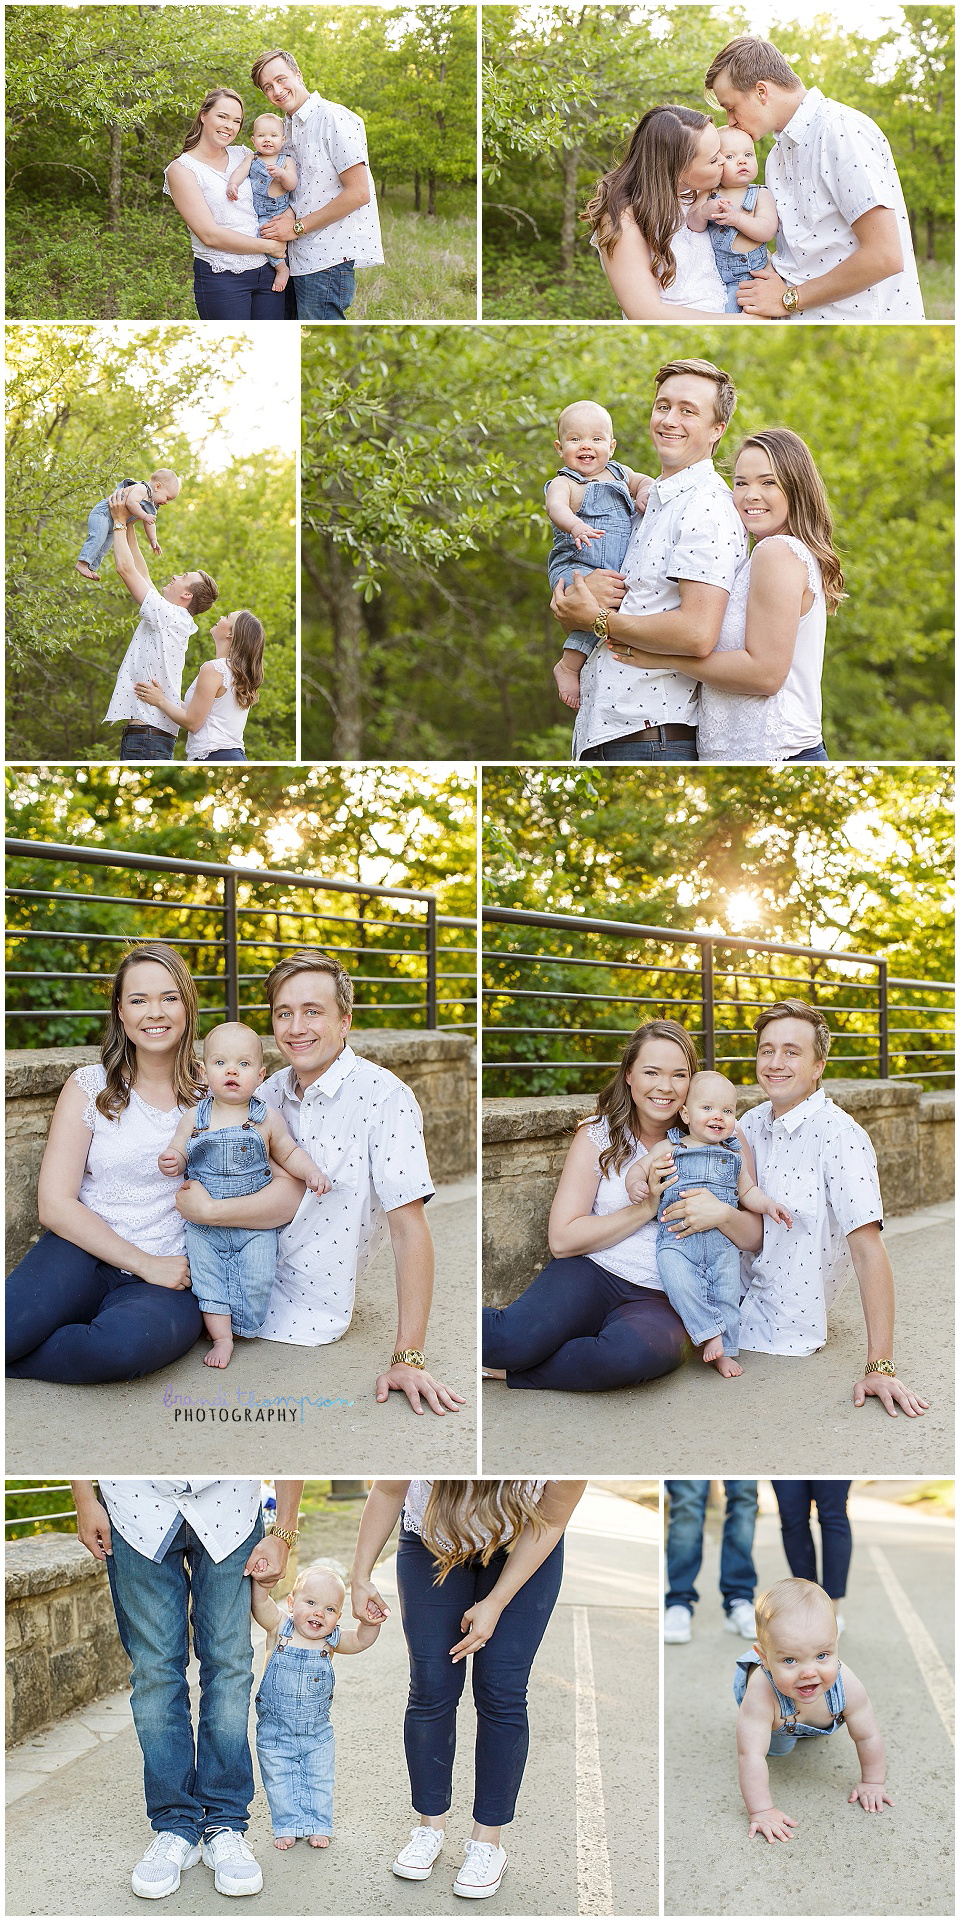 baby boy first birthday session with parent family sessions at arbor hills nature preserve in plano, tx